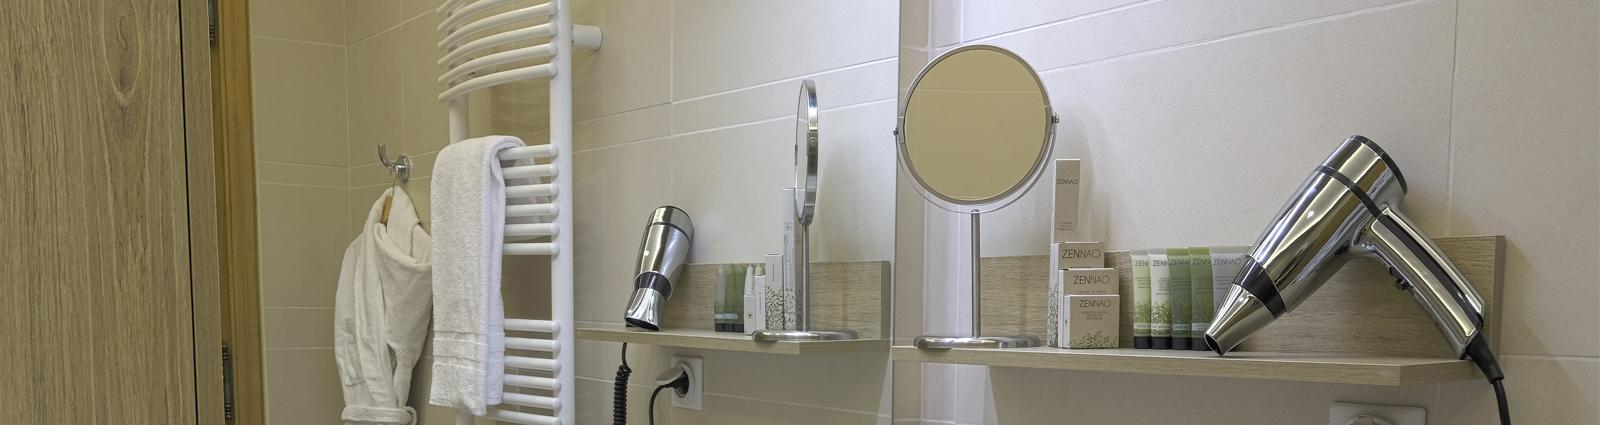 Equipping your hotel bathroom also involves installing a bright wall magnifying mirror. An essential accessory in the hotel industry, it will allow you to satisfy your customers and offer them a quality service.